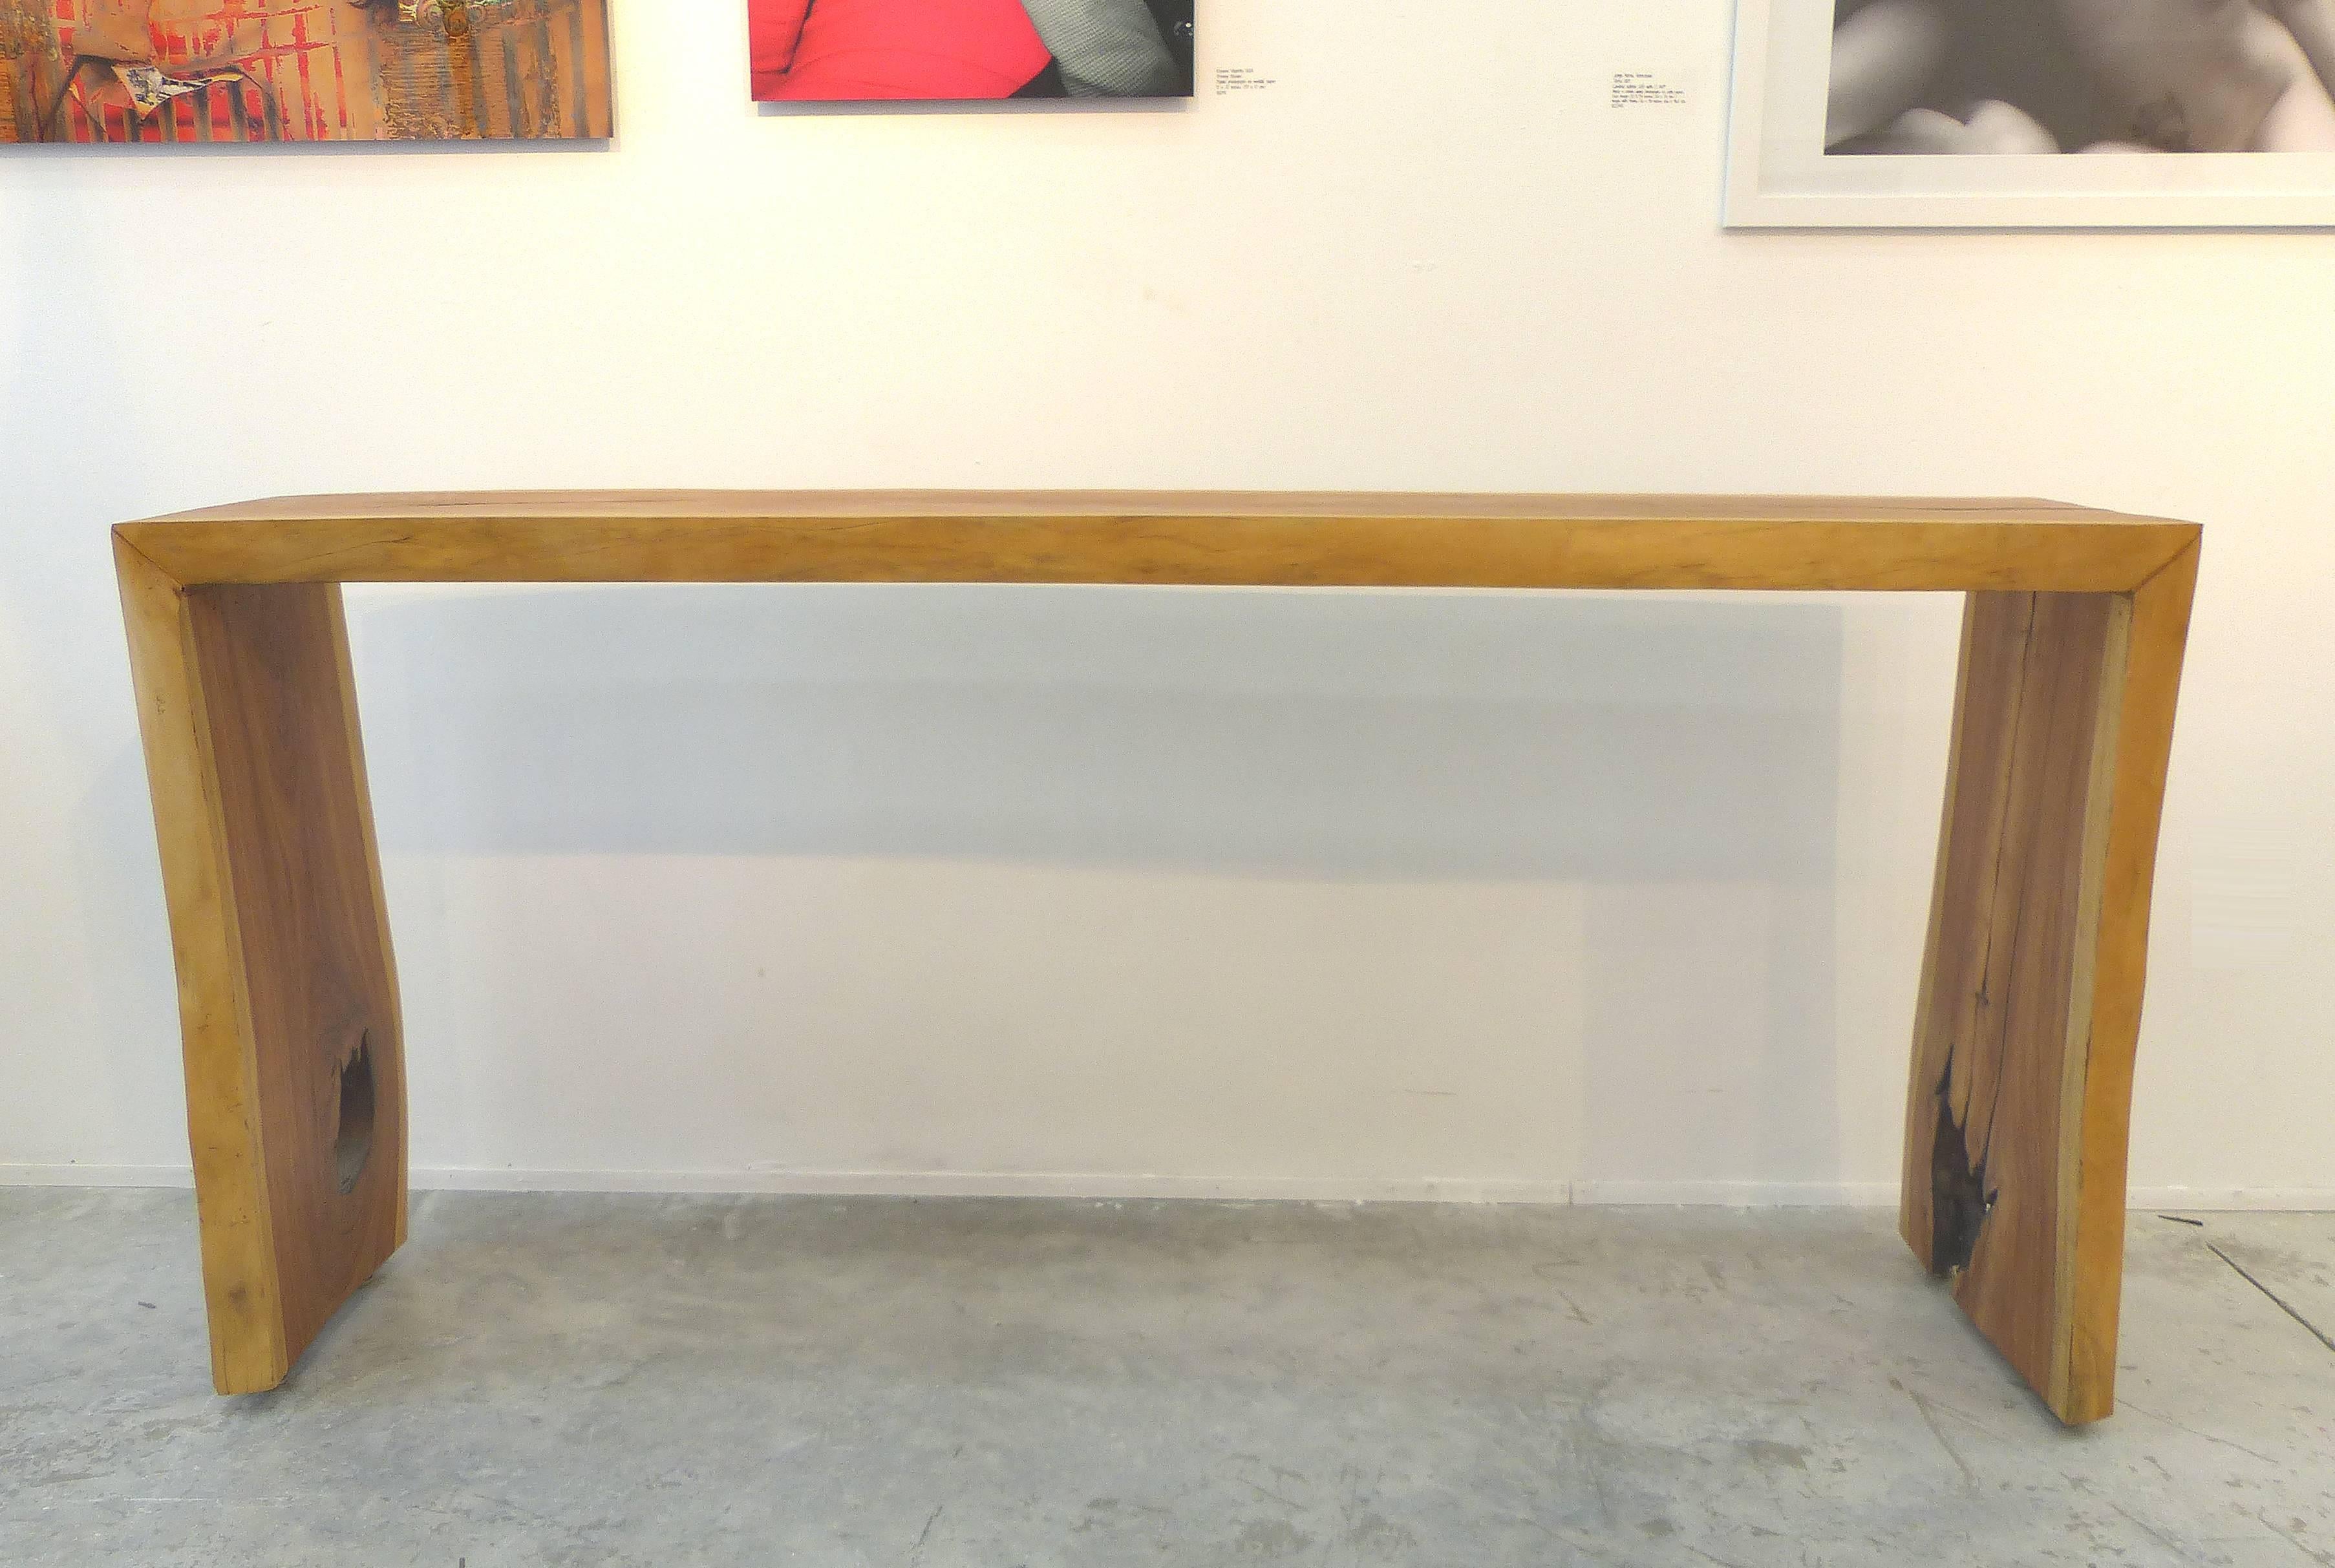 Guarapa Wood Console Table by Brazilian Contemporary Artist Valeria Totti

A beautifully grained garapa wood console table created by Brazilian artist Valeria Totti with wood salvaged from the Amazon. The beauty of this piece is in the wonderful